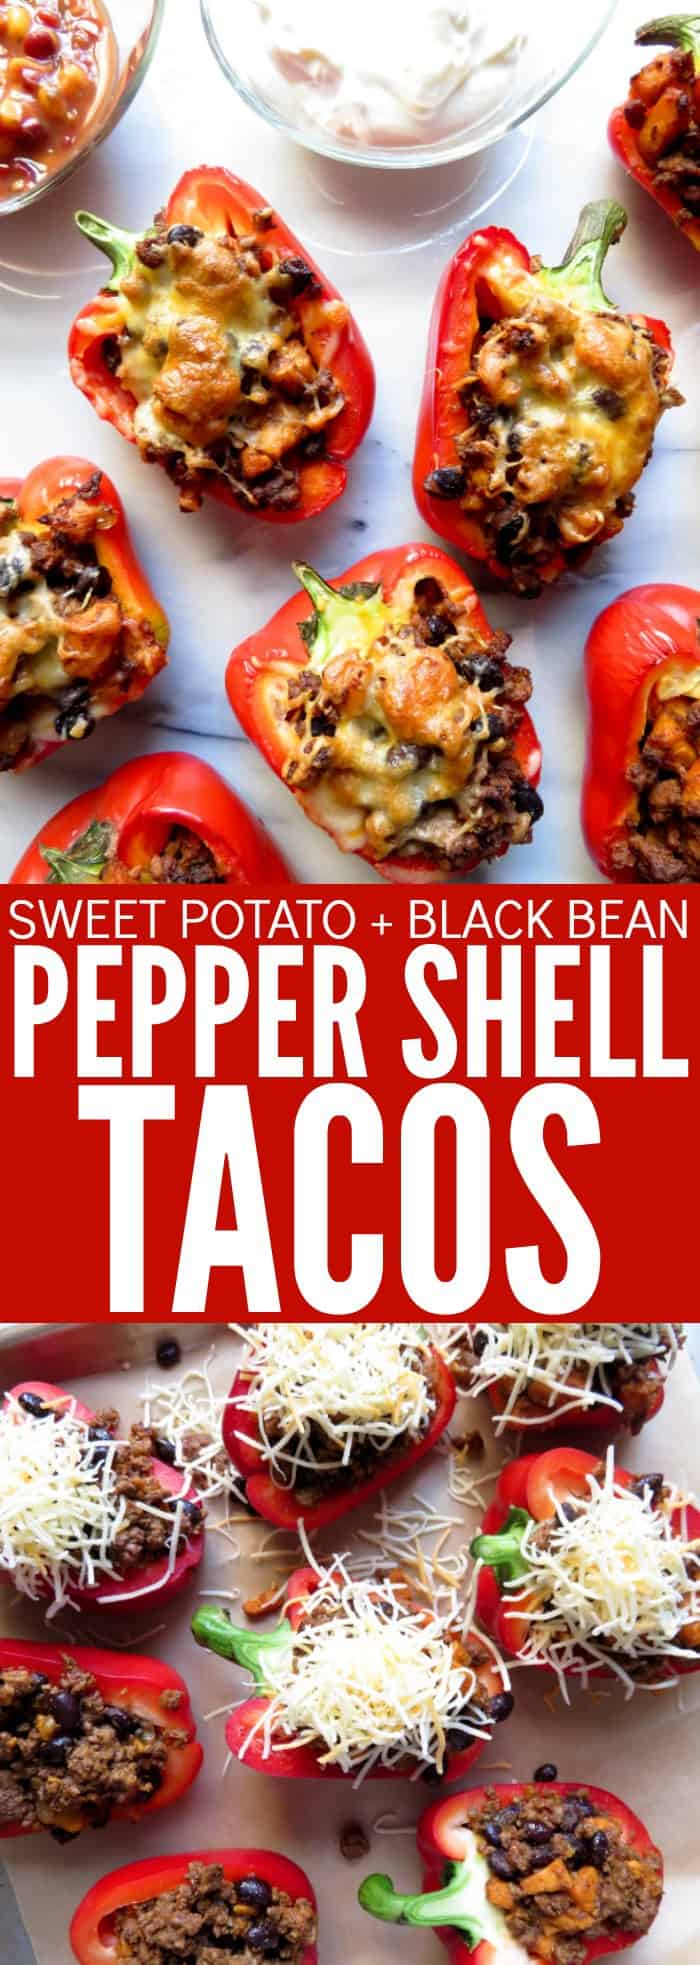 Fun way to celebrate #tacotuesday but keep it low carb and gluten free with these Pepper Shell Tacos!! The sweet potato and black beans add a nice flavor! thetoastedpinenut.com